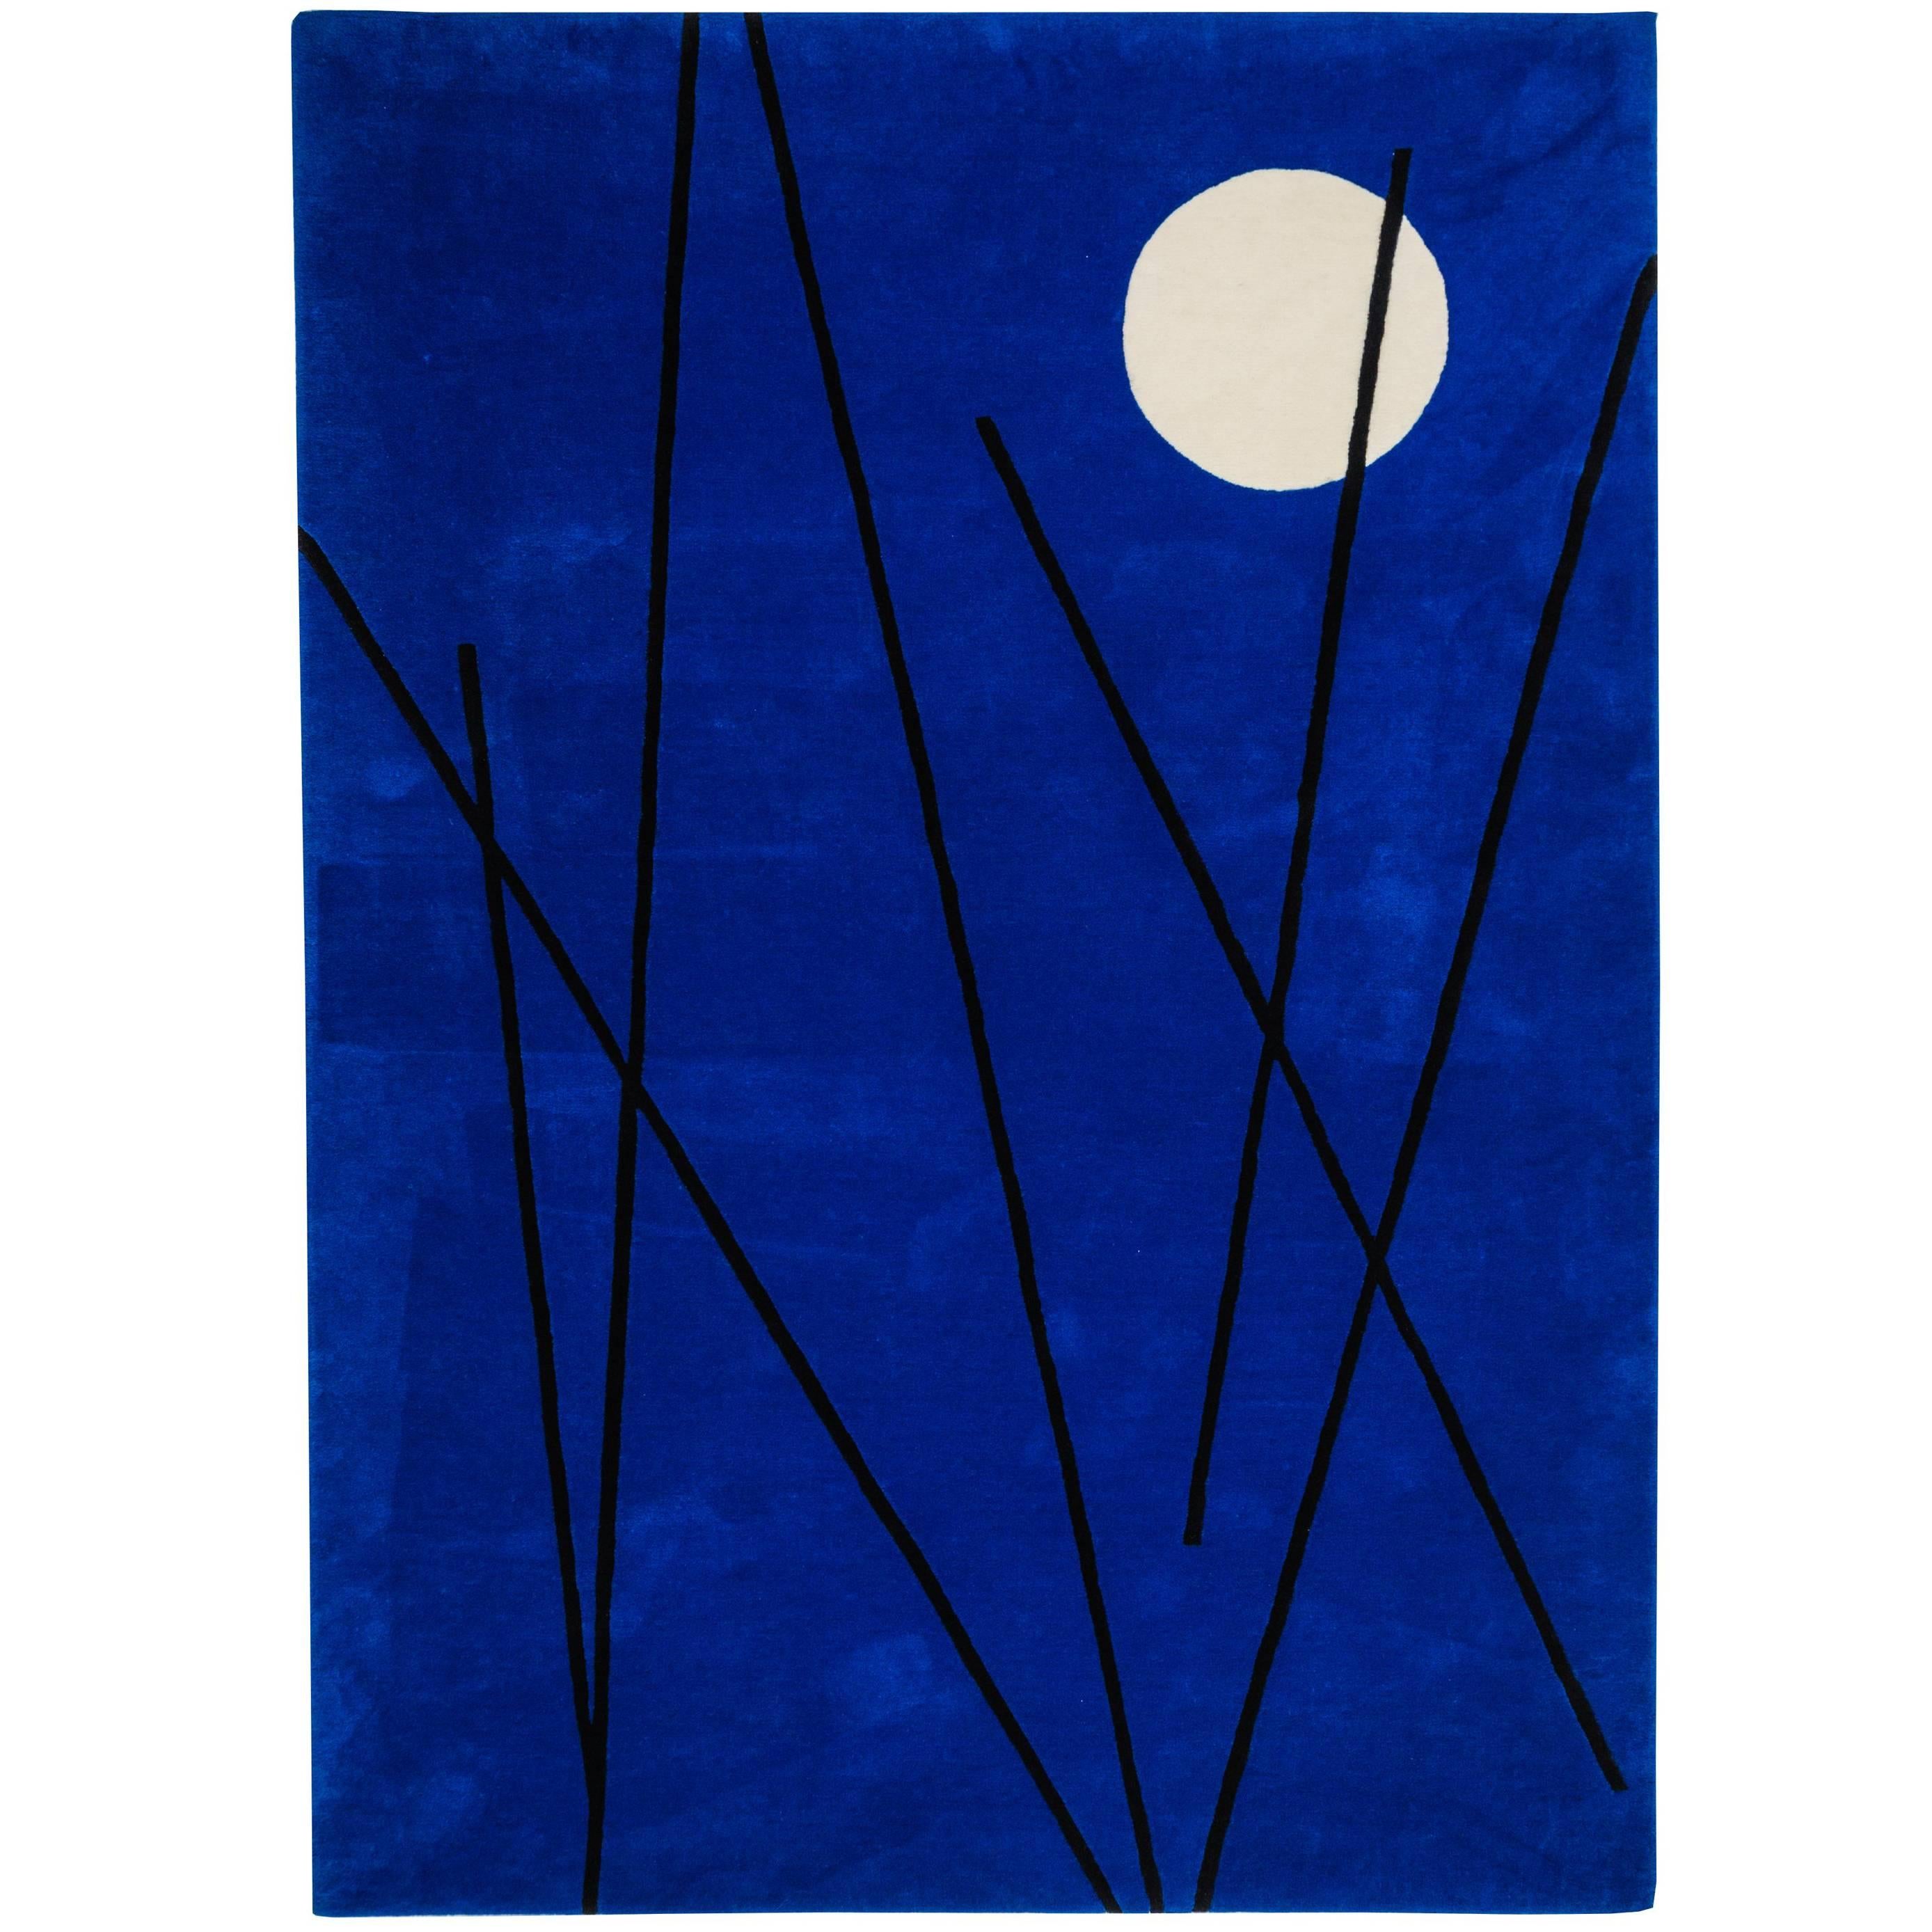  Rug Night Out Blue - Modern Geometric Tufted Wool w/ White Moon & Lines Asian